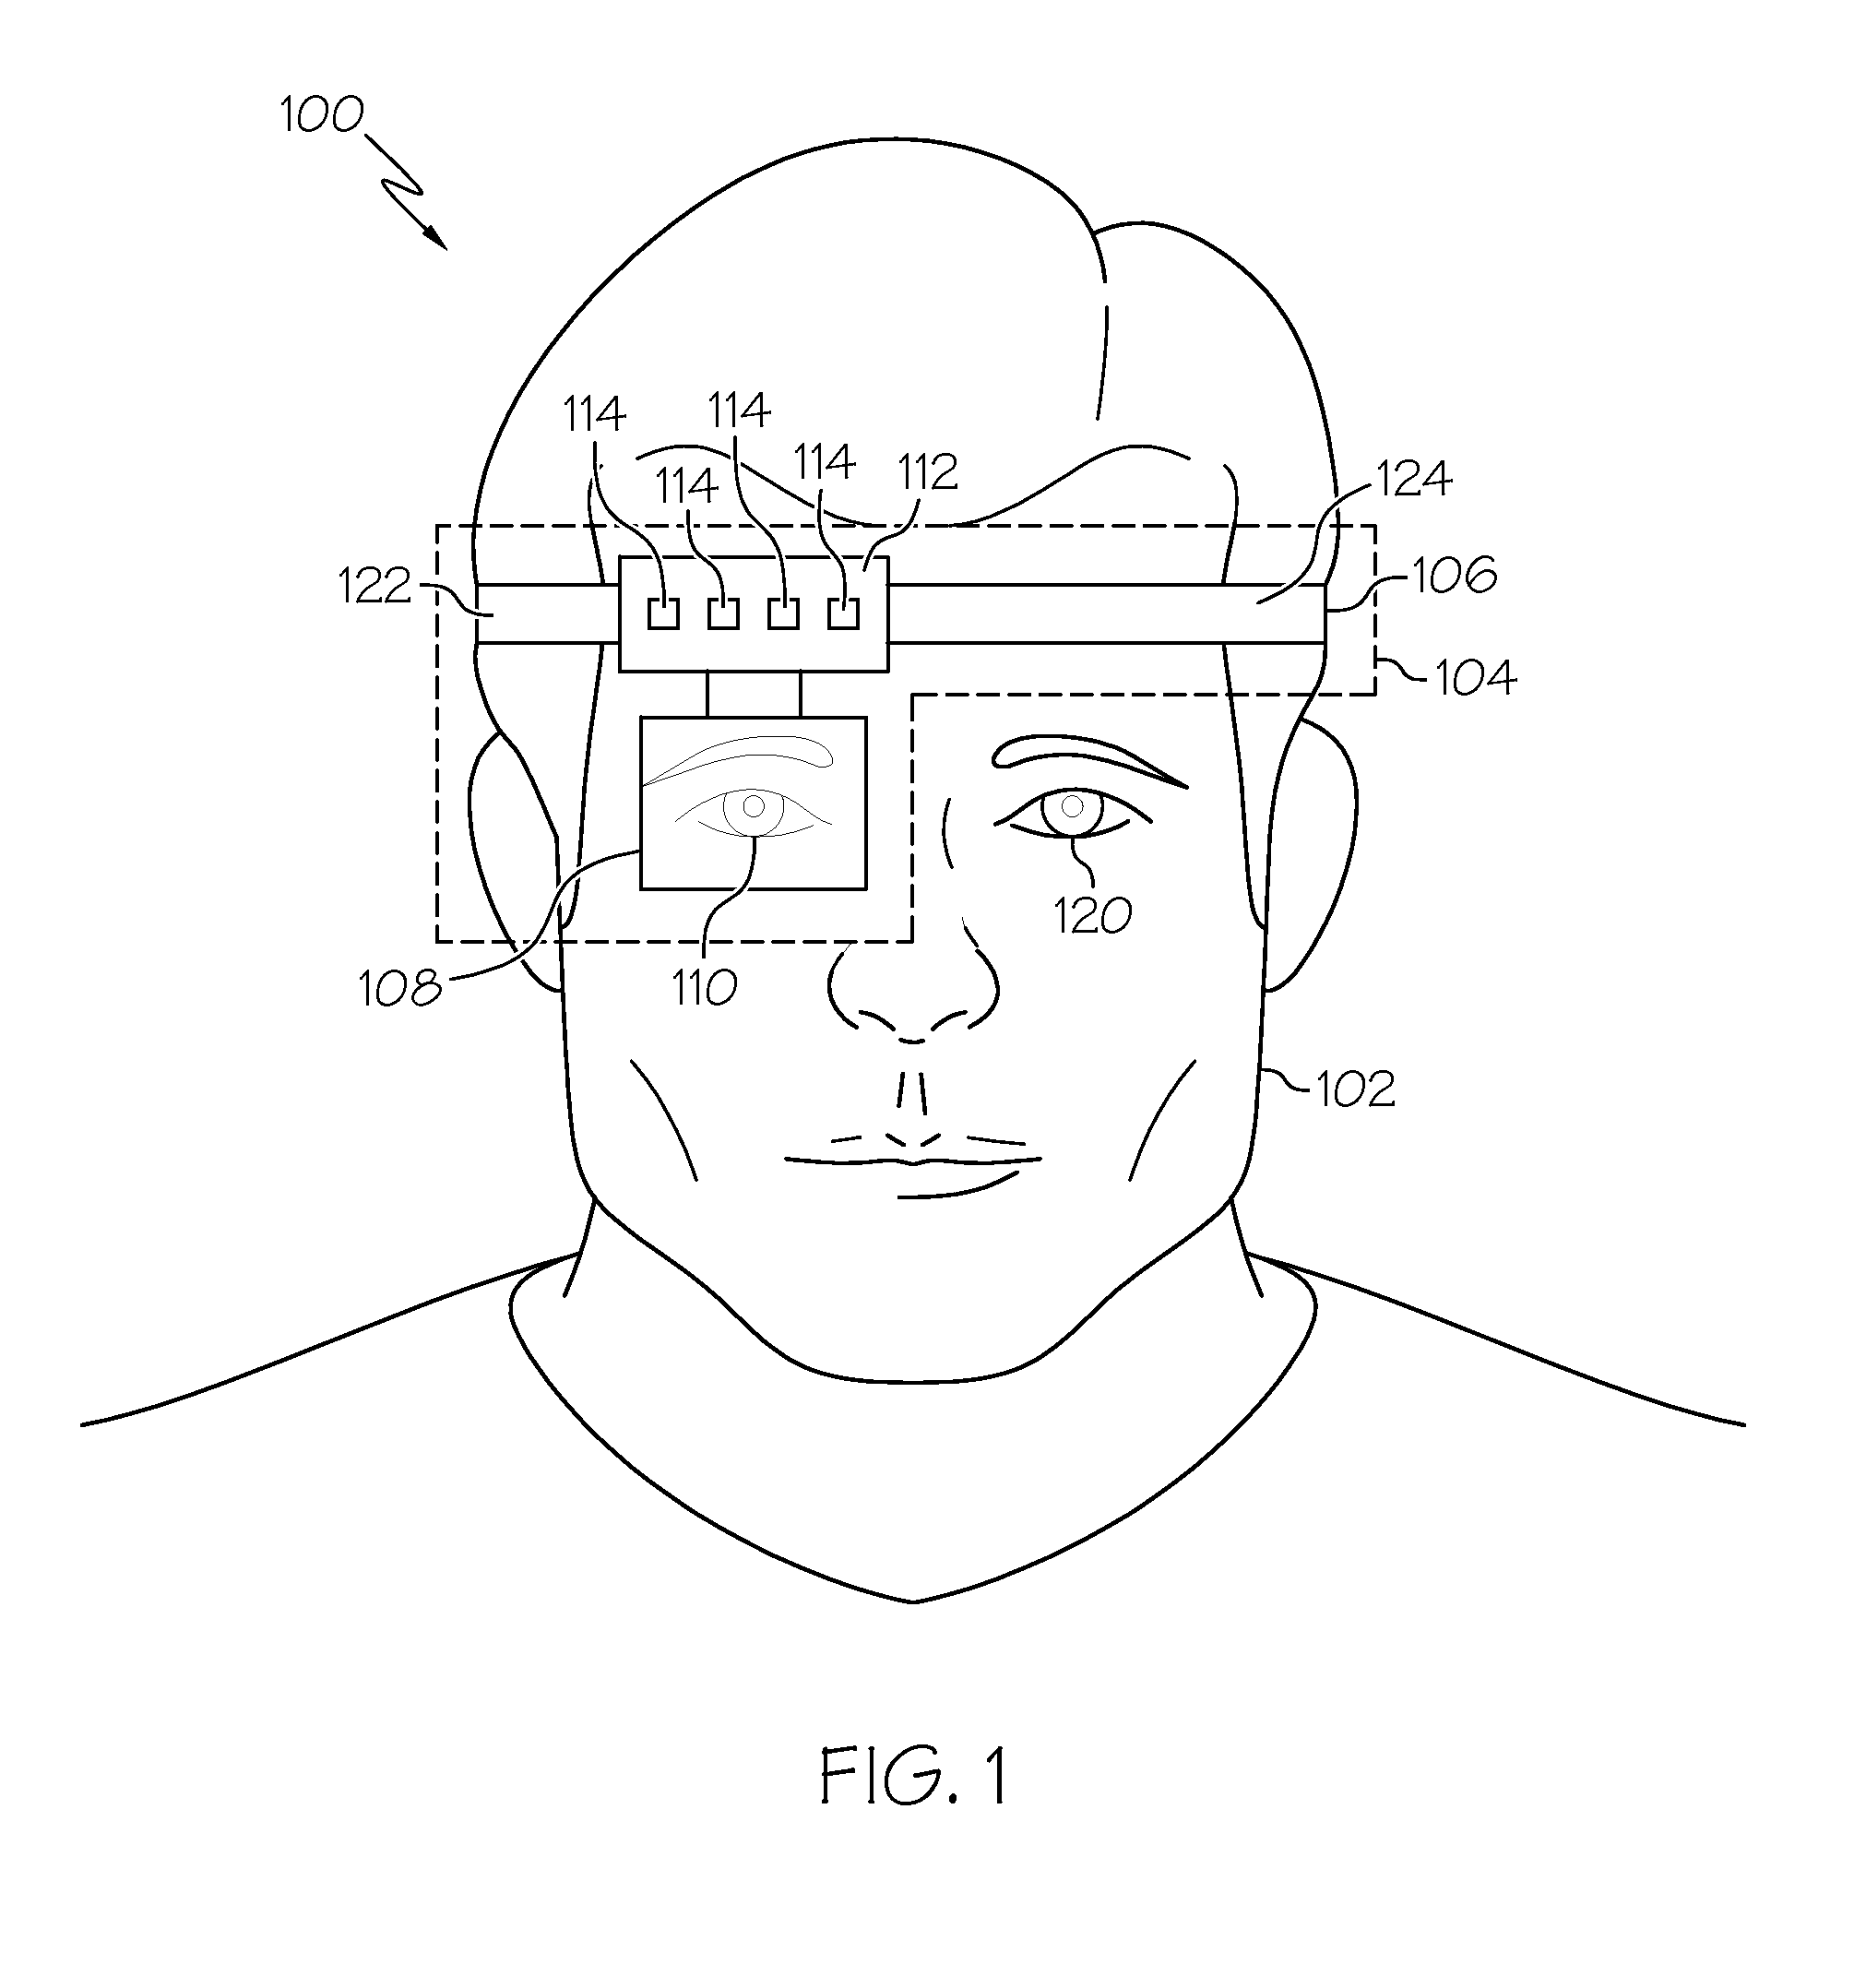 Near-to-eye tracking for adaptive operation